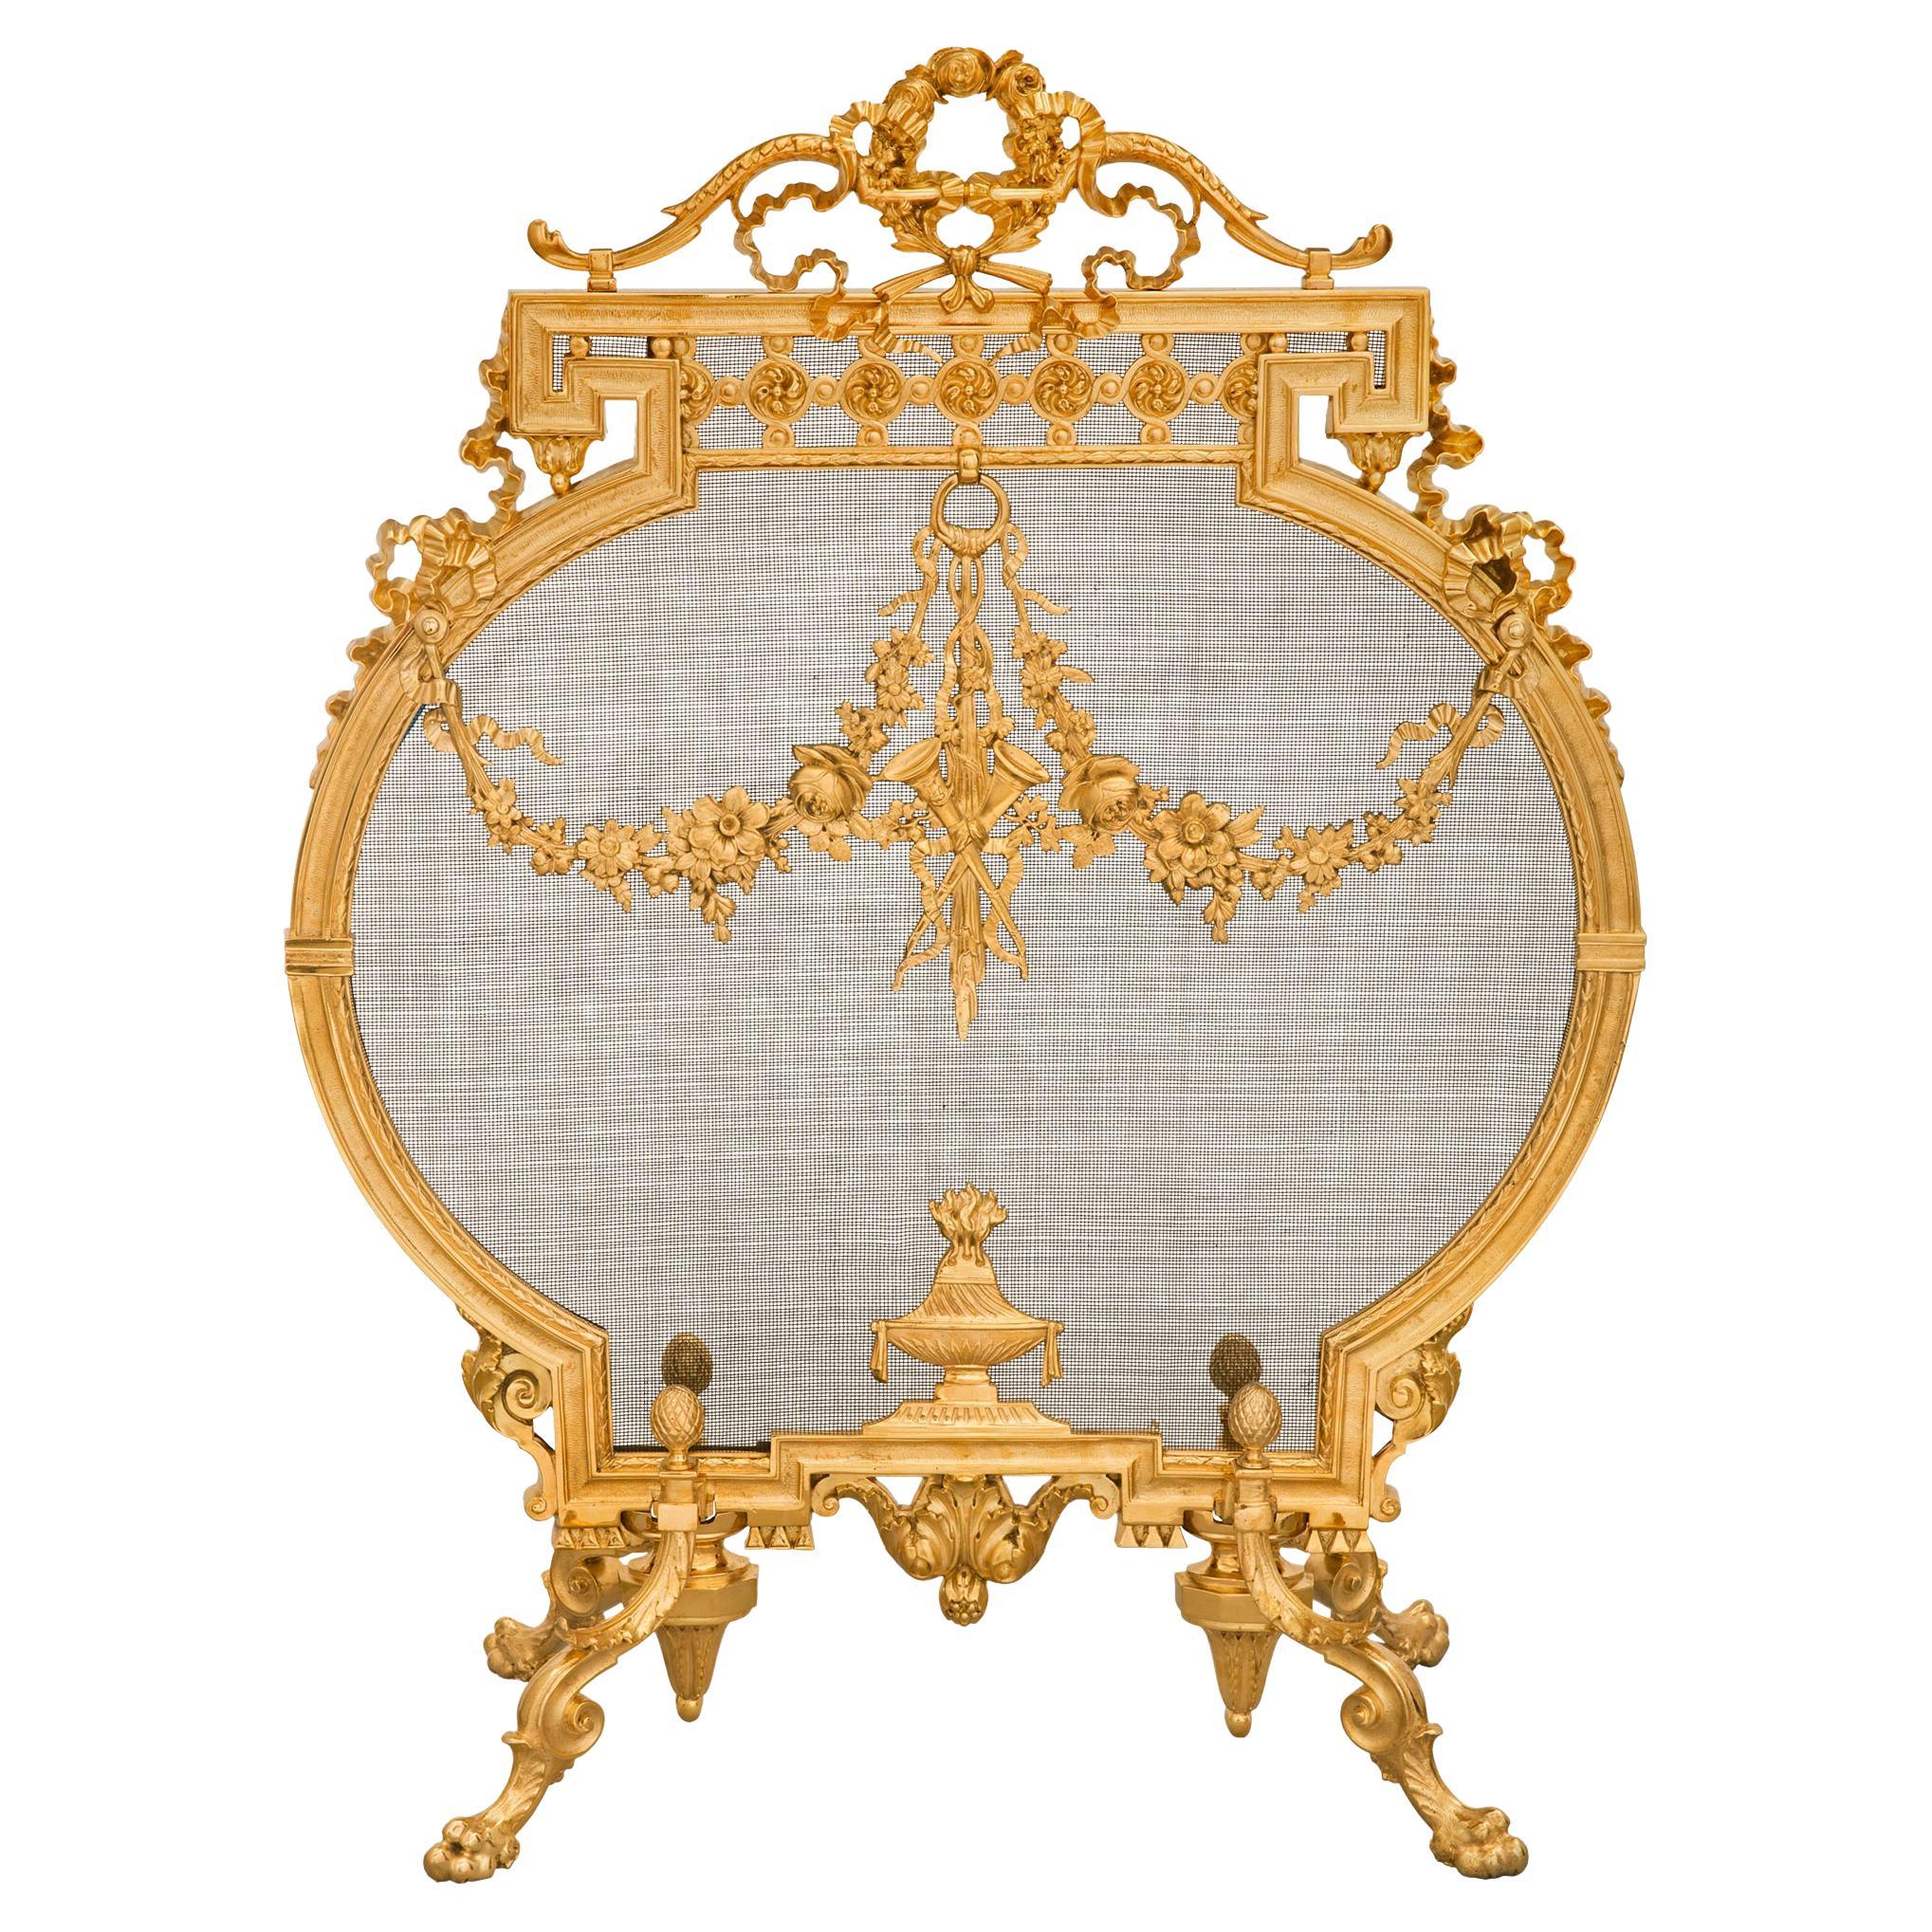 French 19th Century Neo-Classical St. Belle Époque Period Ormolu Fire Screen